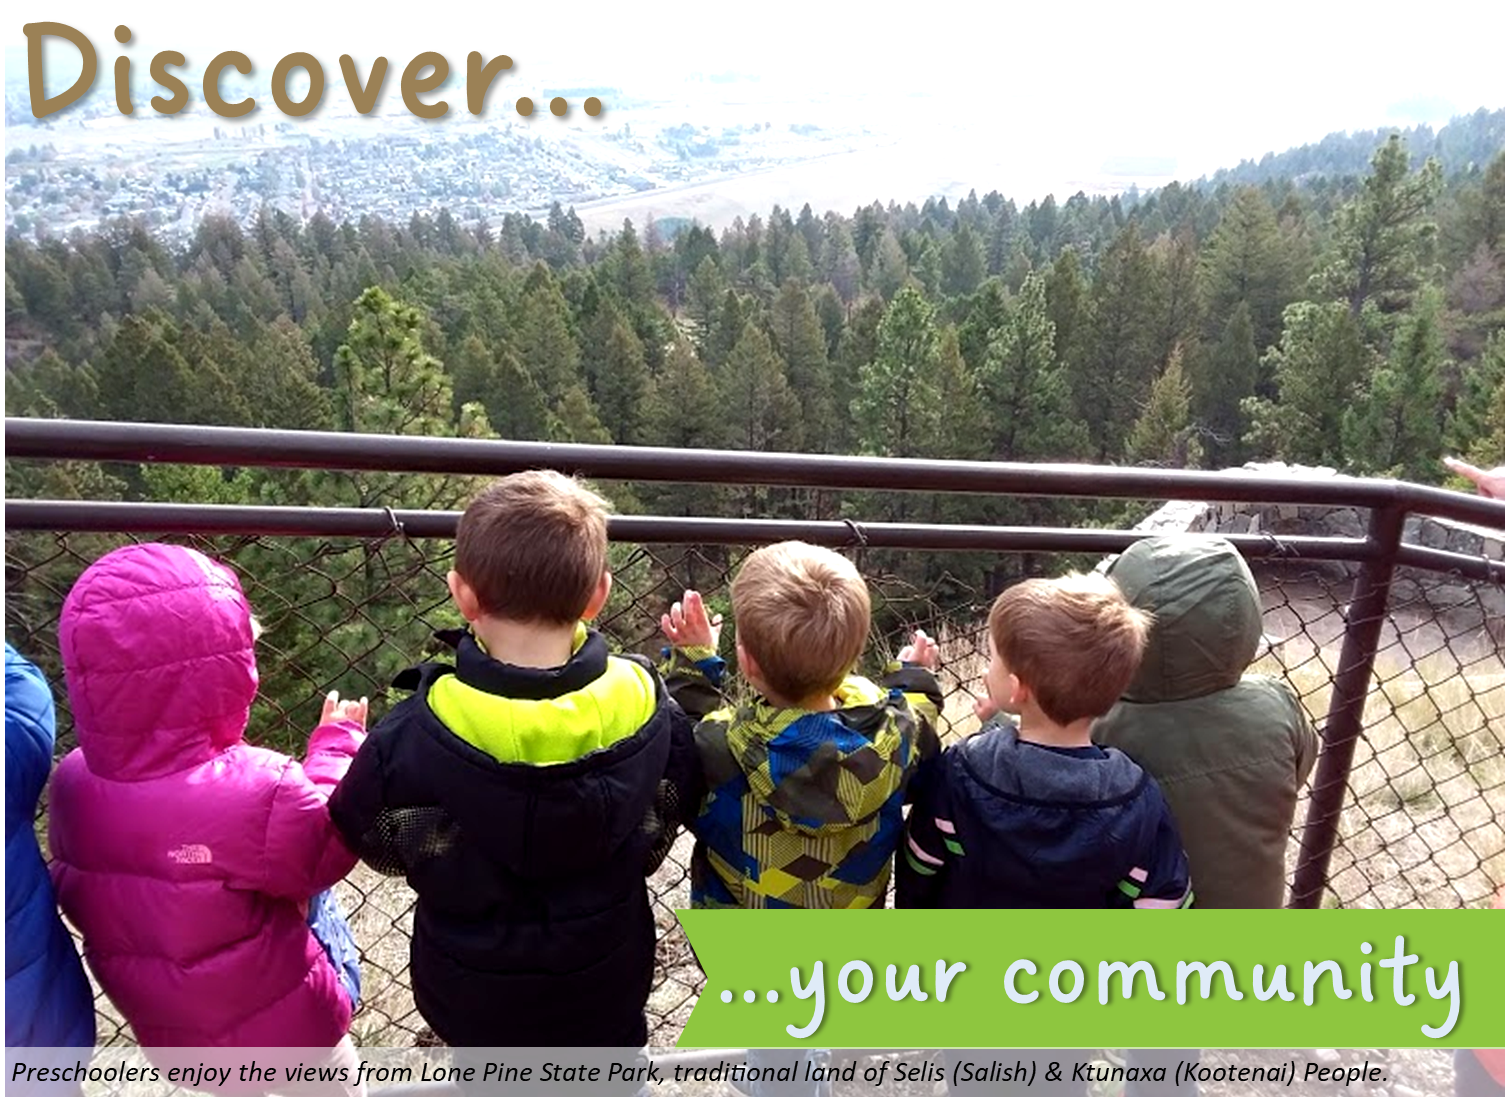 Five preschoolers in coats stand at a chain-link fence, looking over a forest of pine trees and a valley.